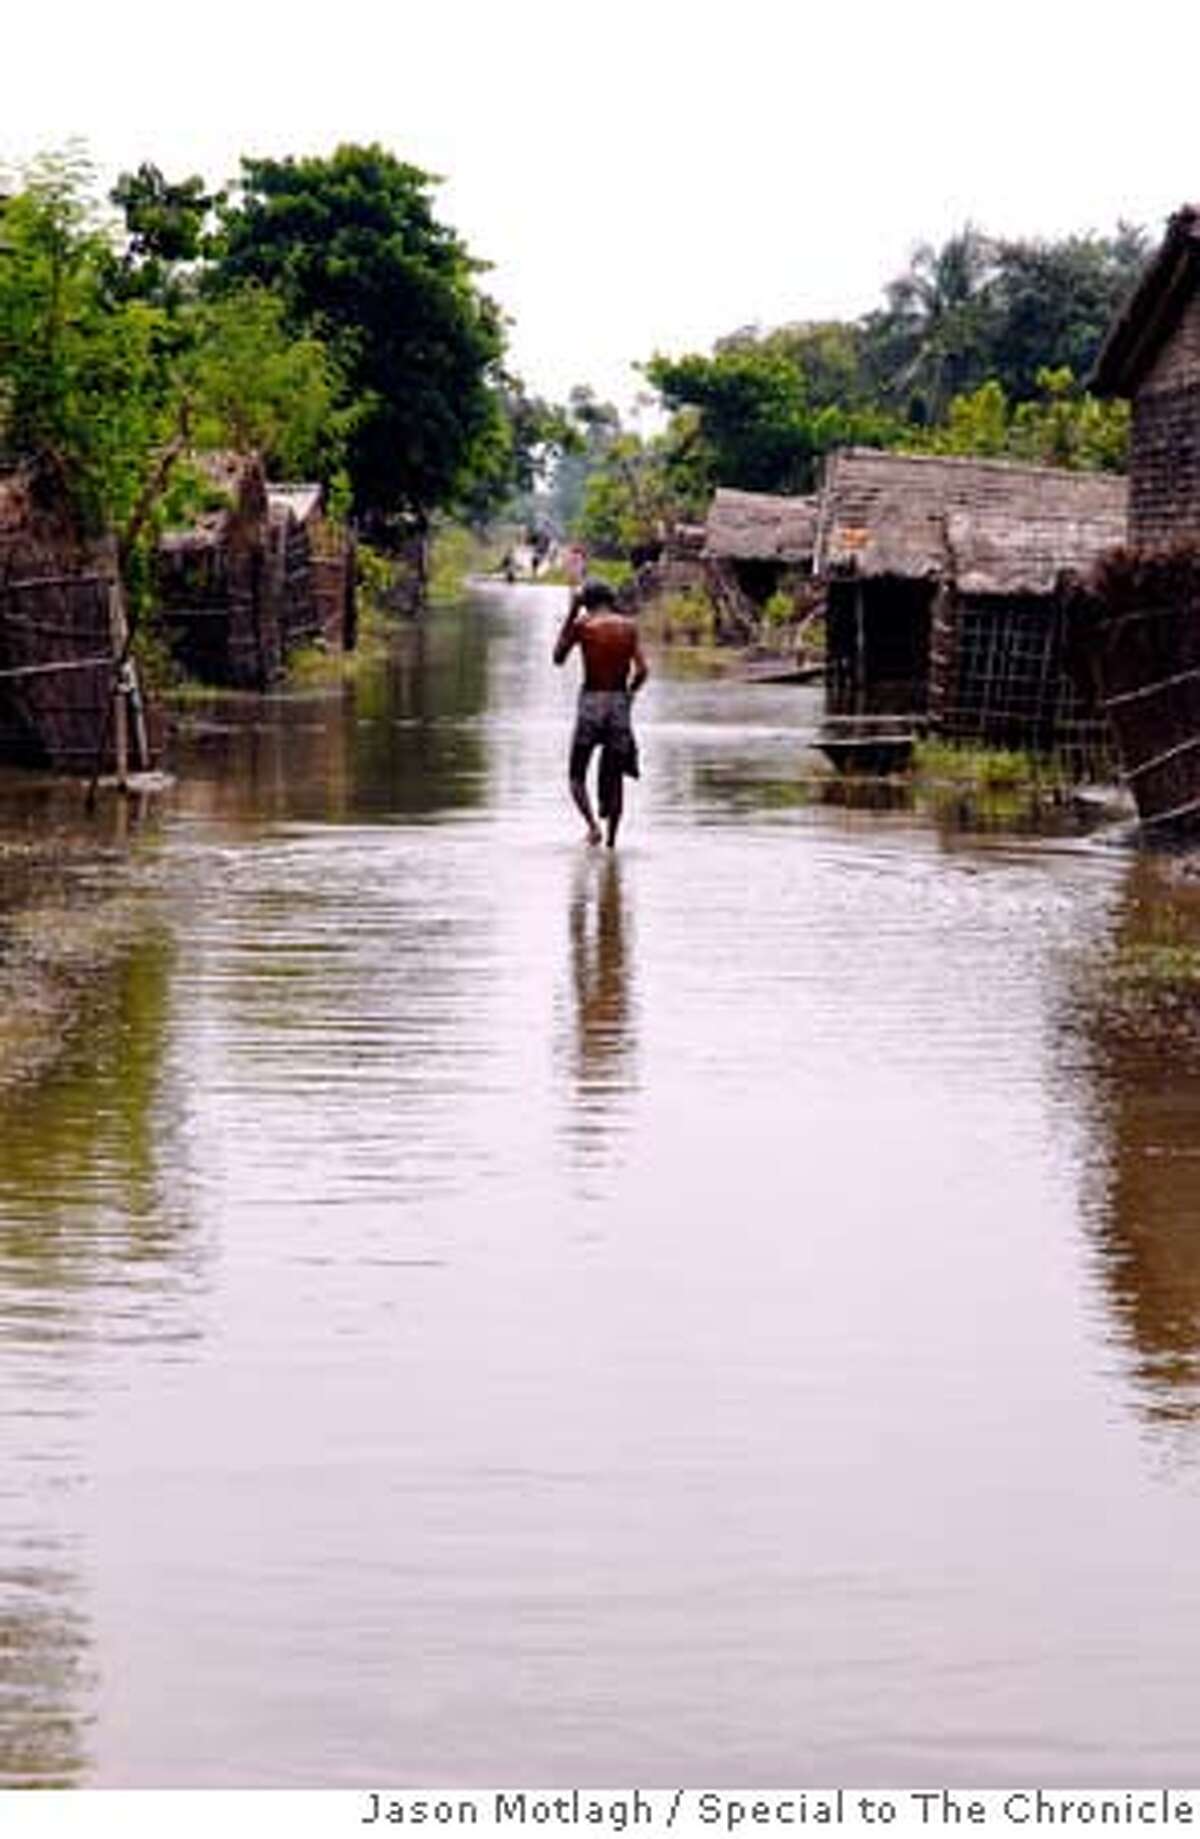 A man belonging to the musafar, the lowest sub-caste in Indian society, wades through water back to village in Muzaffarpur district. CR: Jason MOTLAGH / Special to The Chronicle